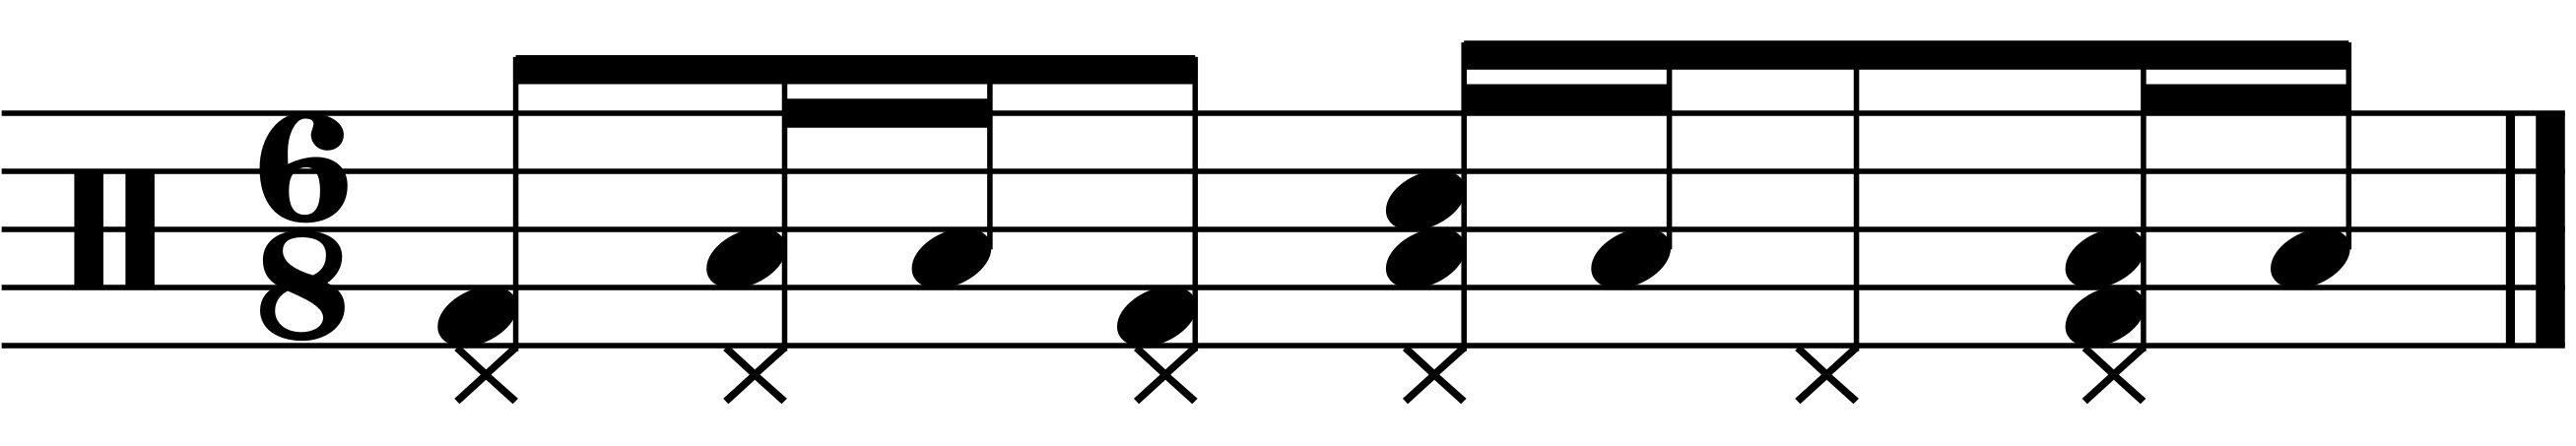 A 6/8 groove example